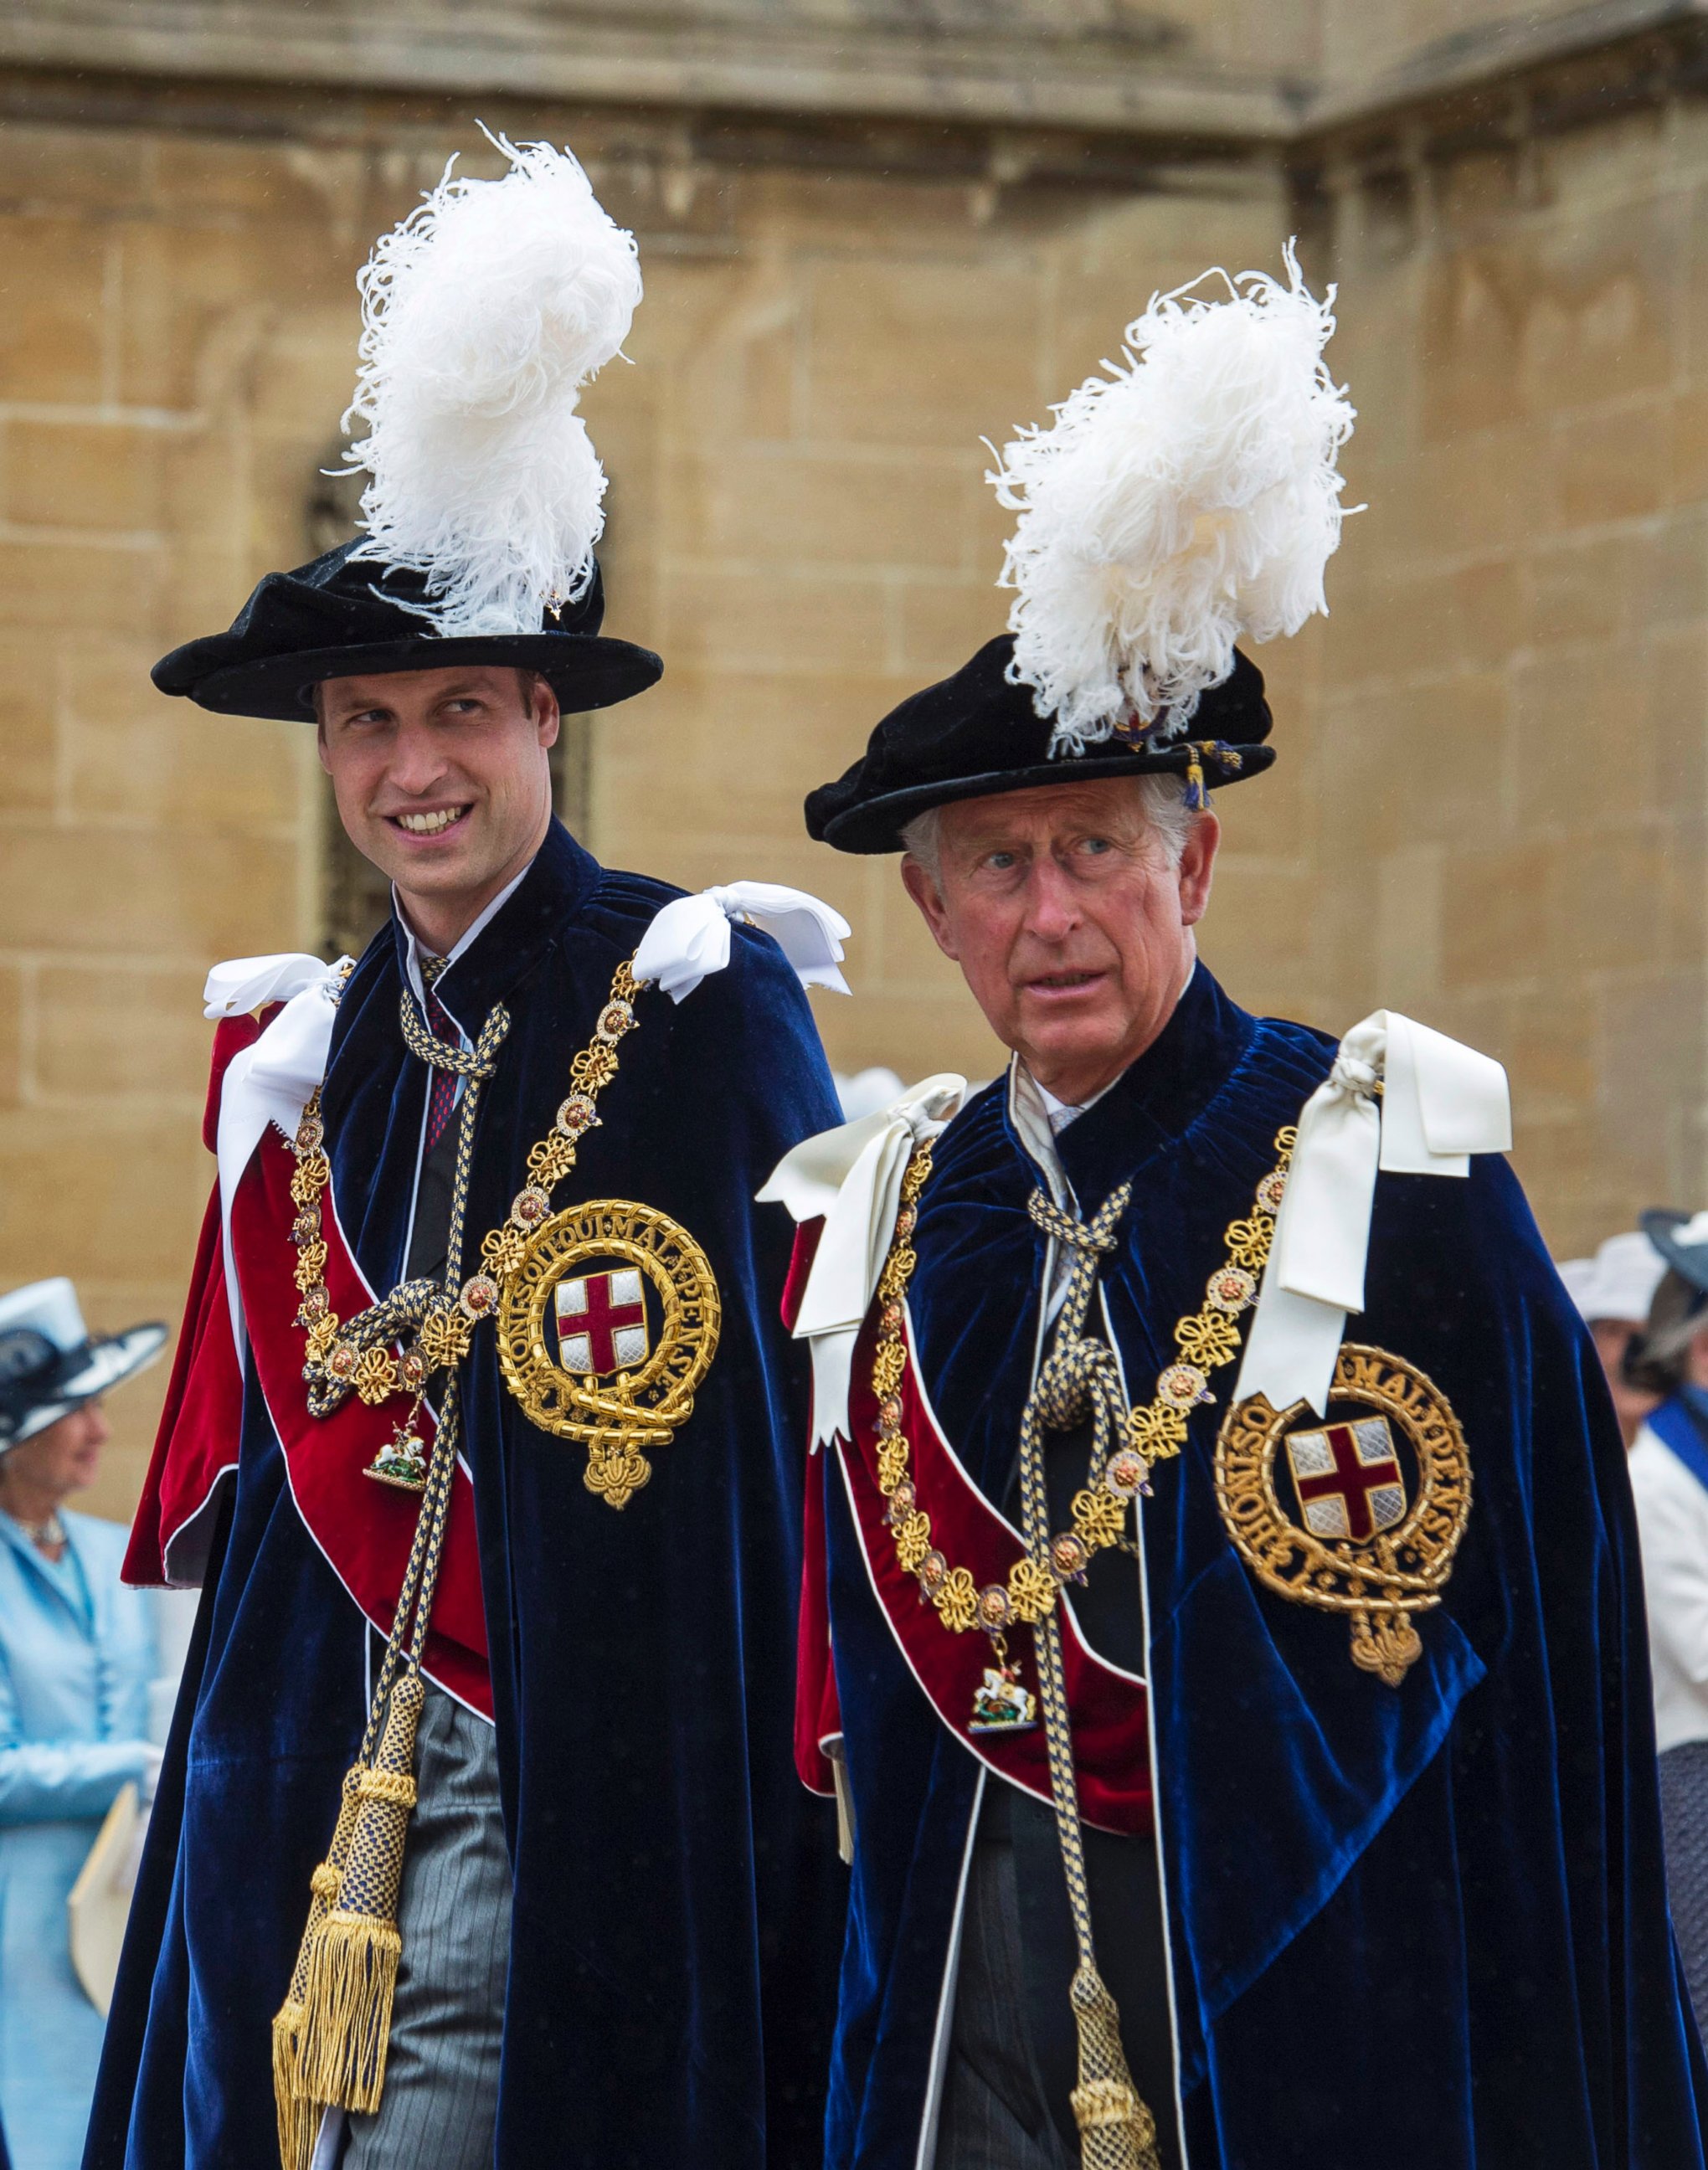 PHOTO: Prince William, Duke of Cambridge and Prince Charles, Prince of Wales arrive to attend the Most Noble Order of the Garter Ceremony on June 16, 2014 in Windsor, England.